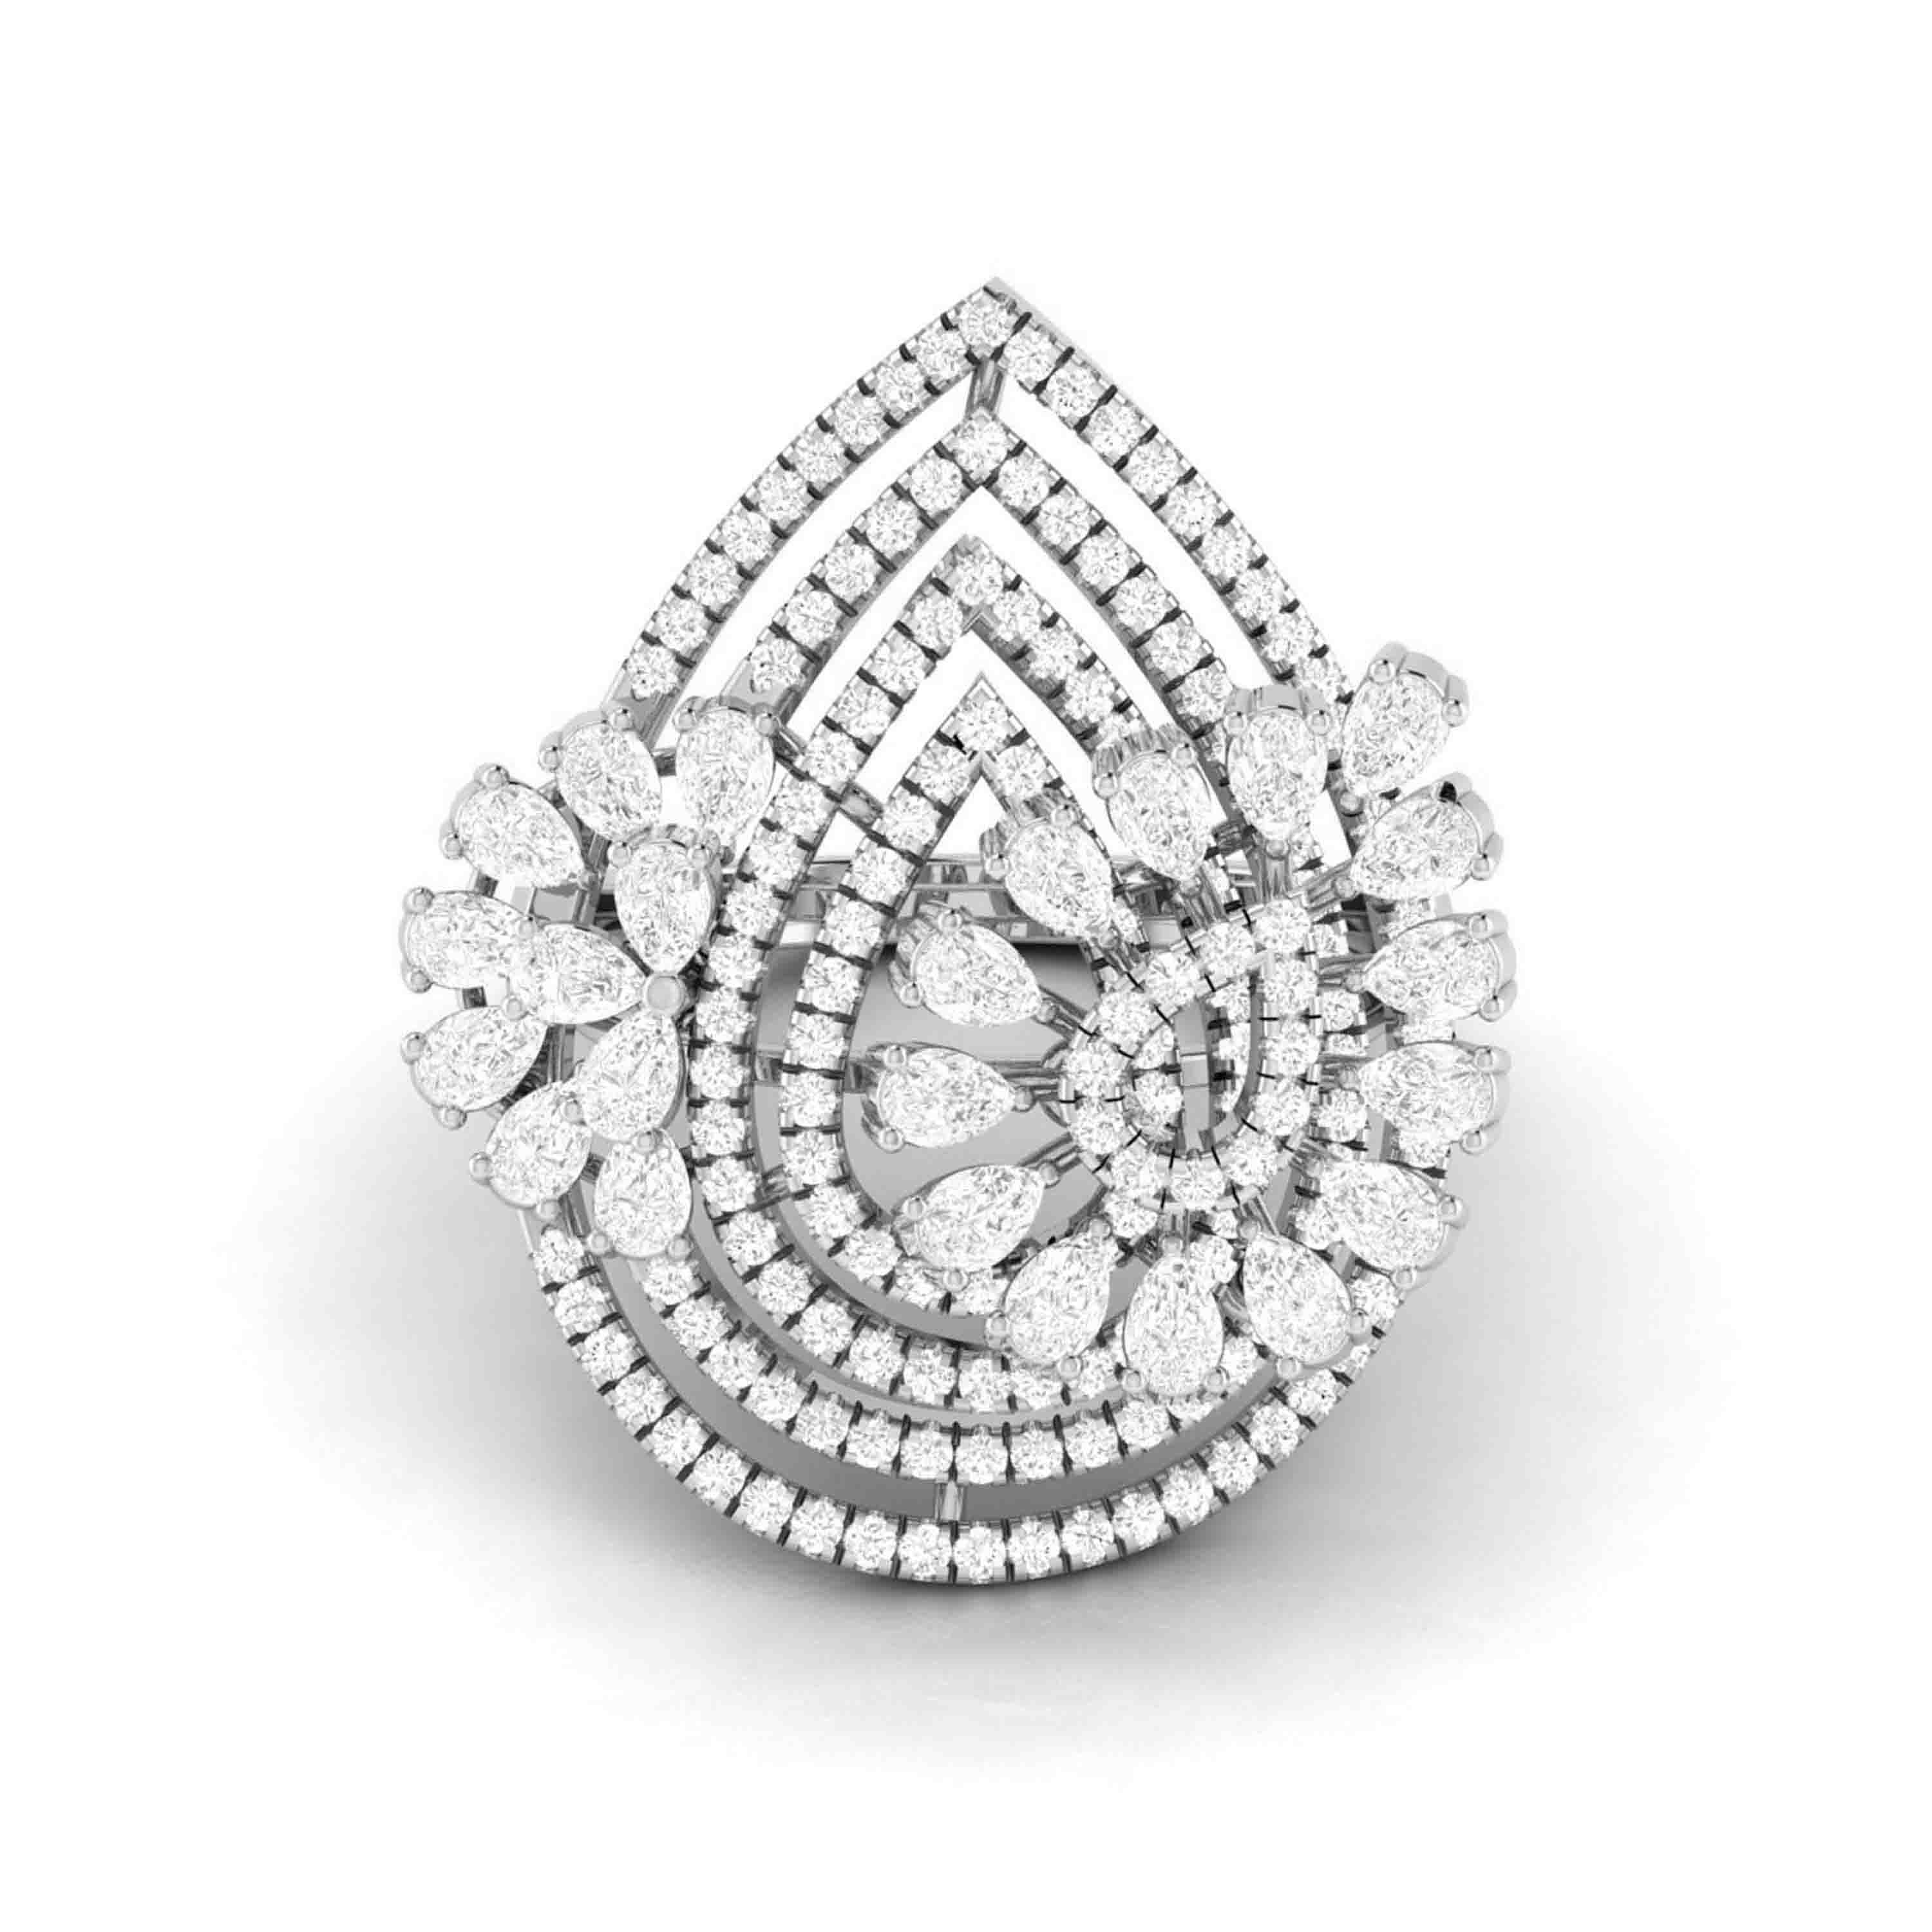 Art Deco White Gold 1 ct Diamond Cocktail Ring – Stacey Fay Designs